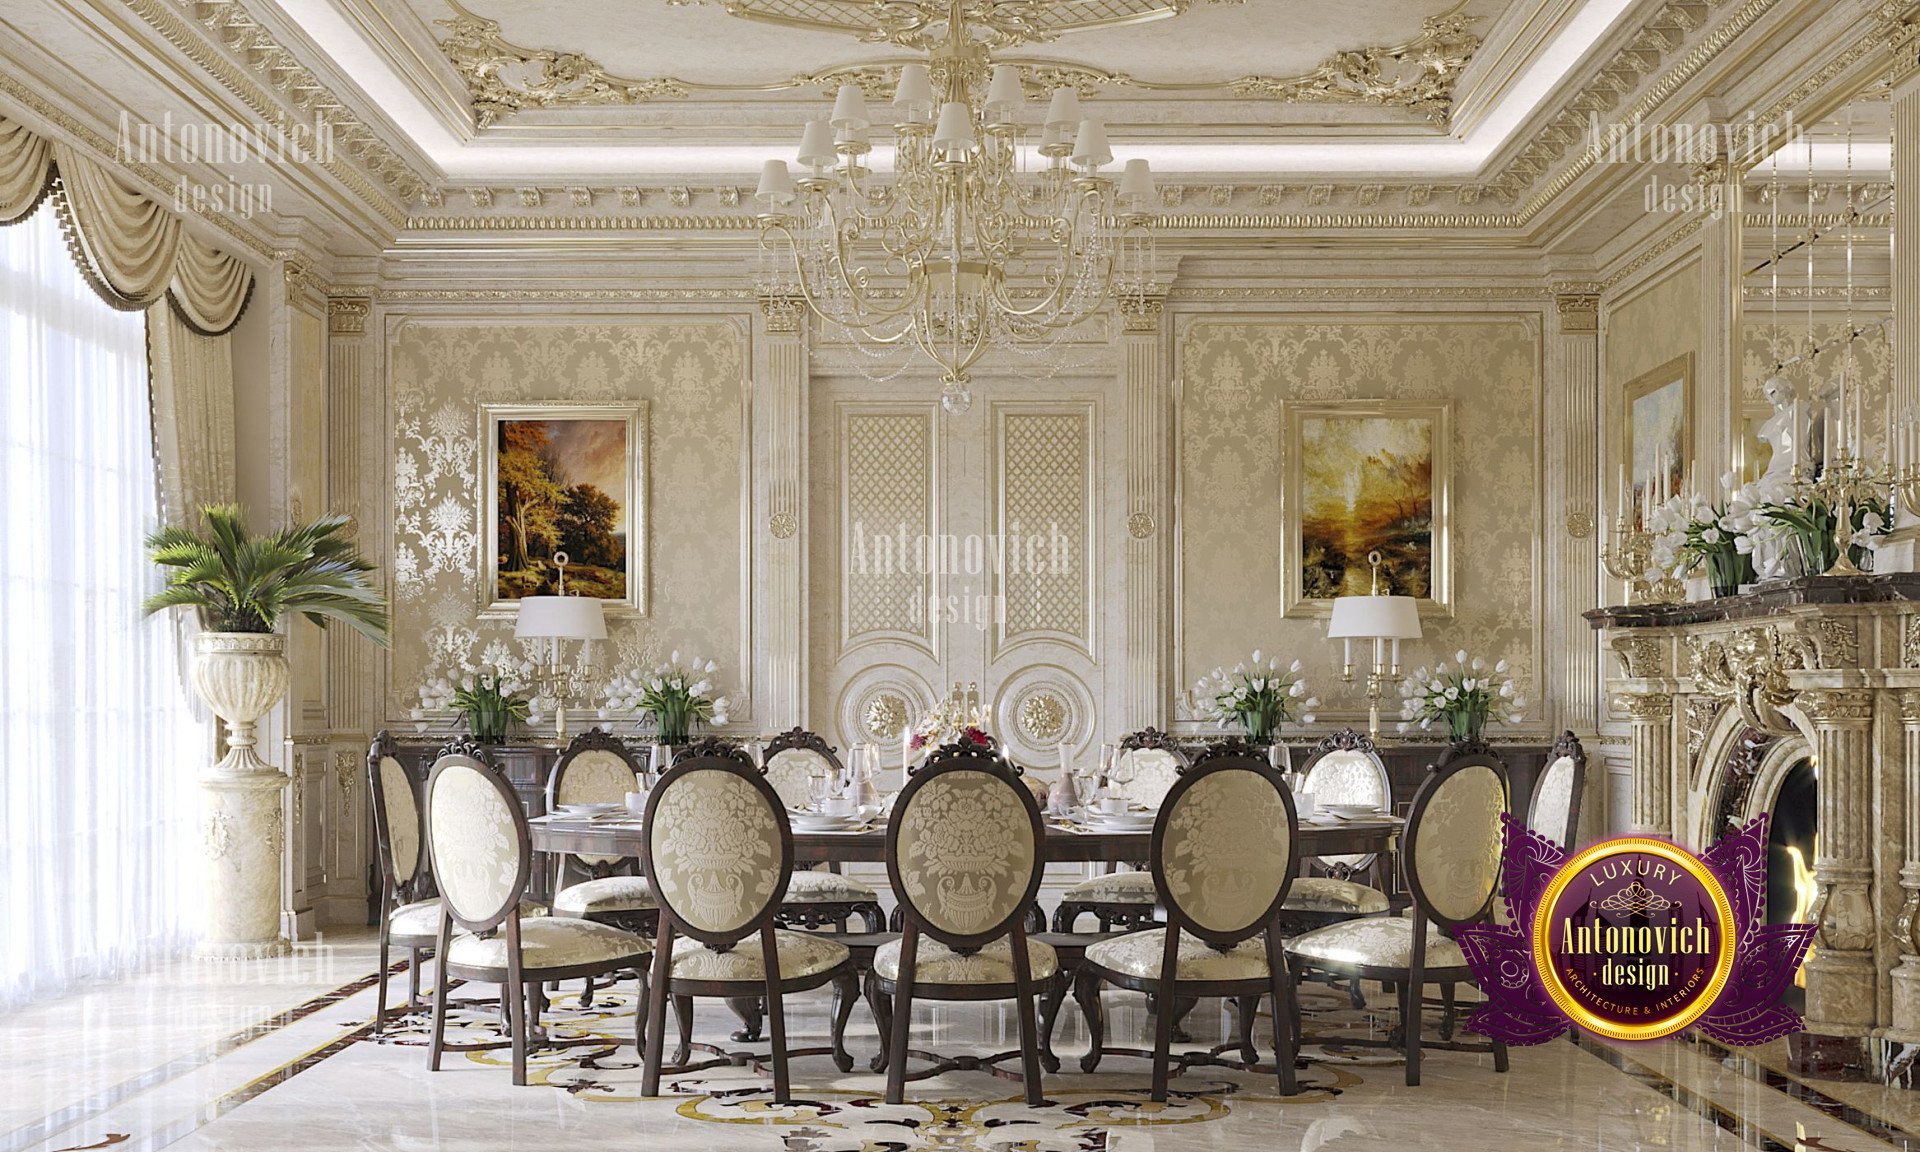 Classic Home Interior Design: Timeless Beauty And Elegance